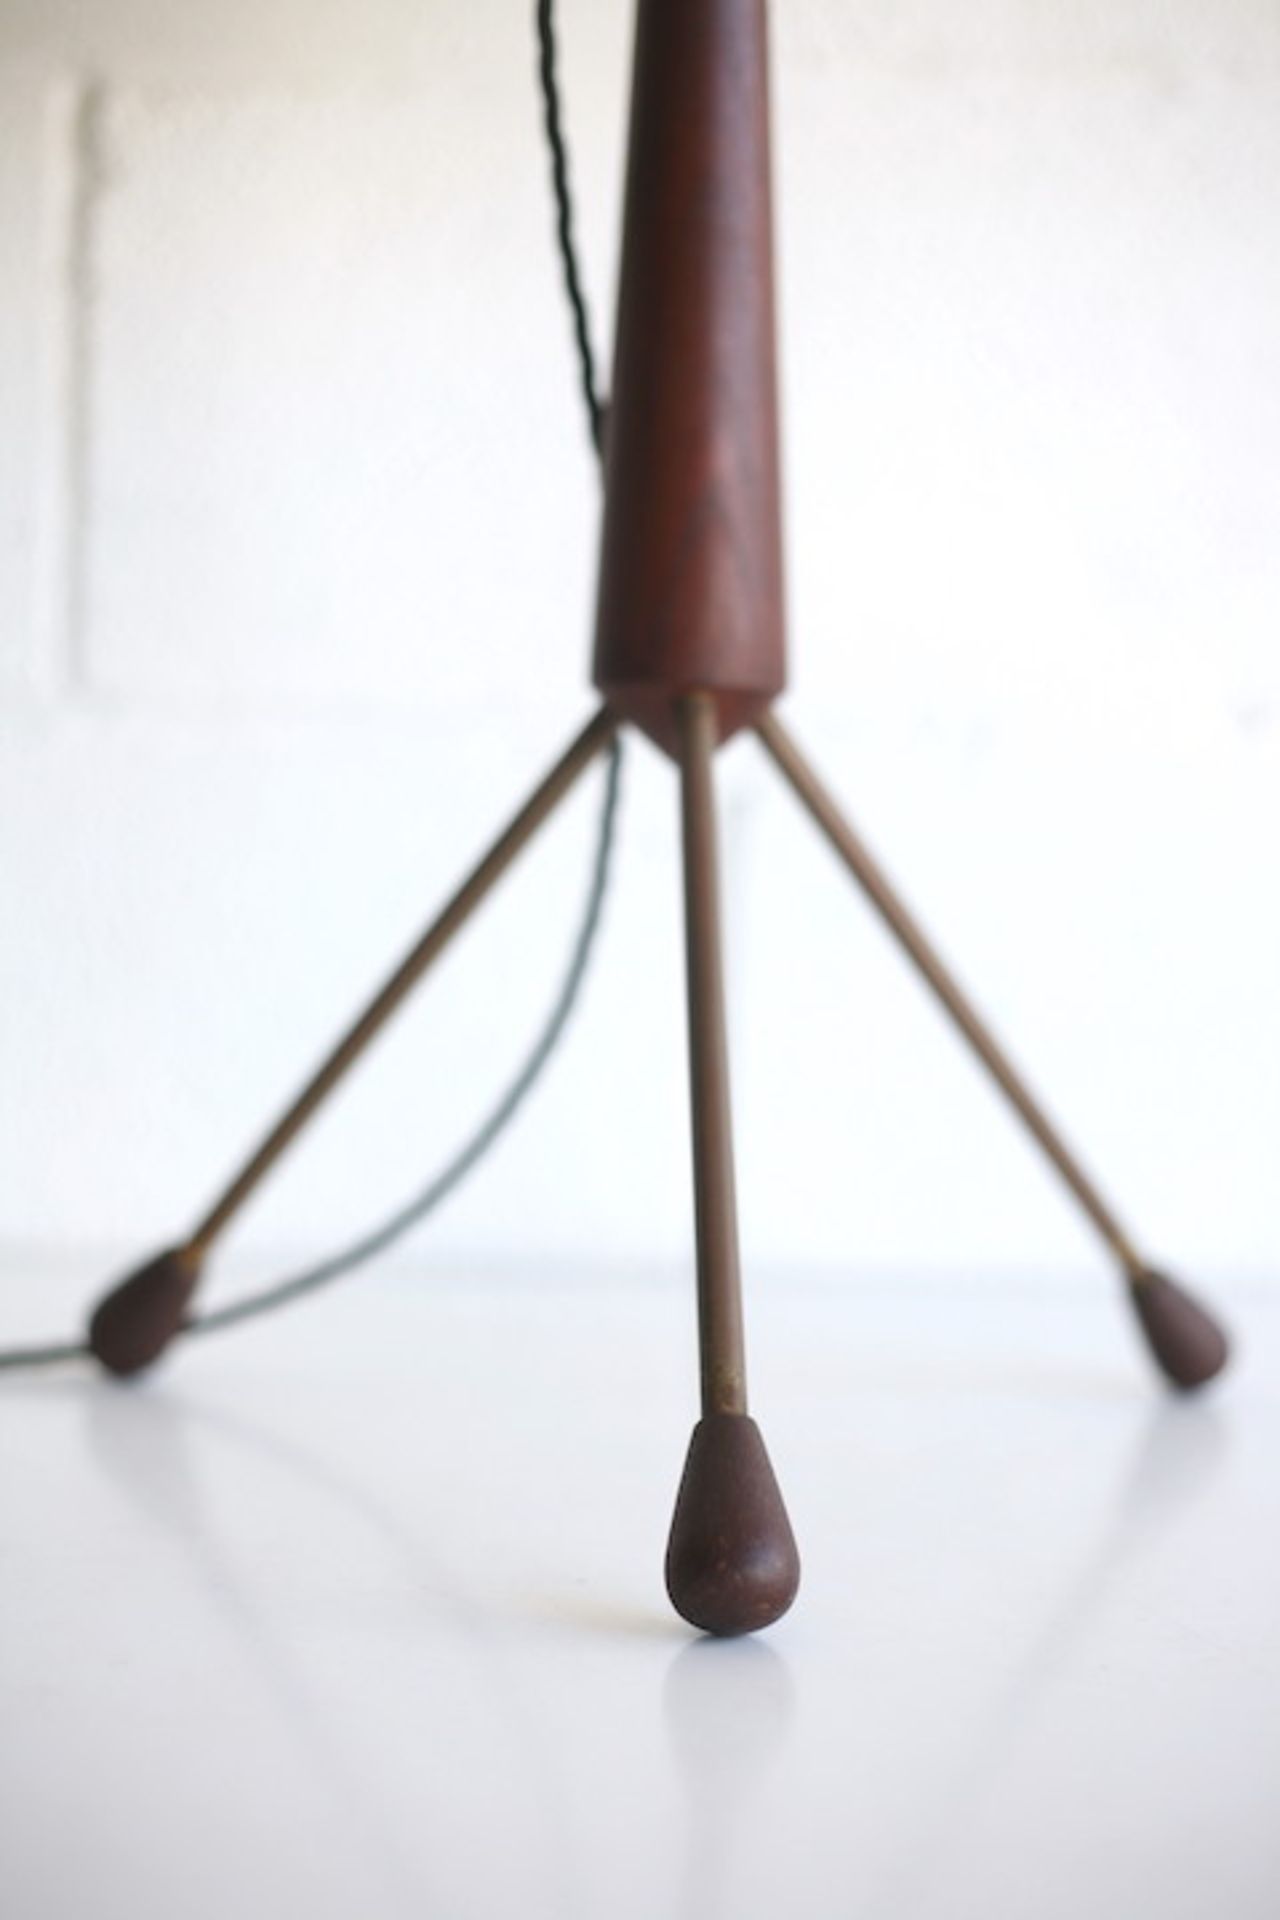 20TH CENTURY 1960s TEAK AND BRASS TRIPOD TABLE LAMP - Image 3 of 5